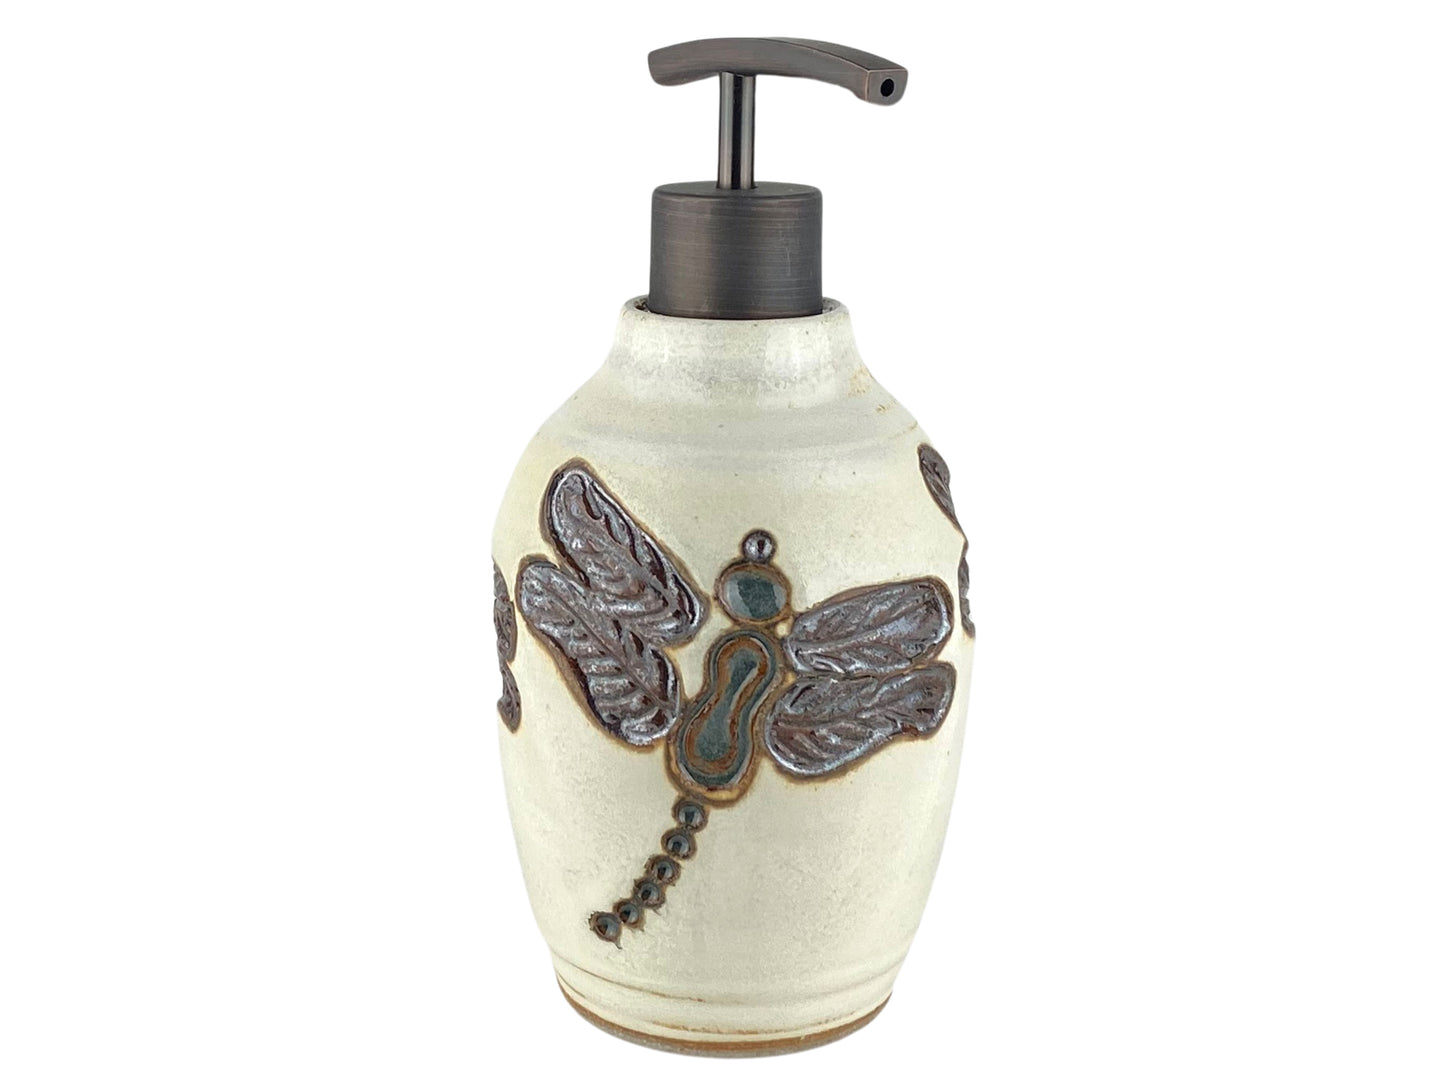 16 oz. Liquid Soap or Lotion Dispenser with Dragonfly Design